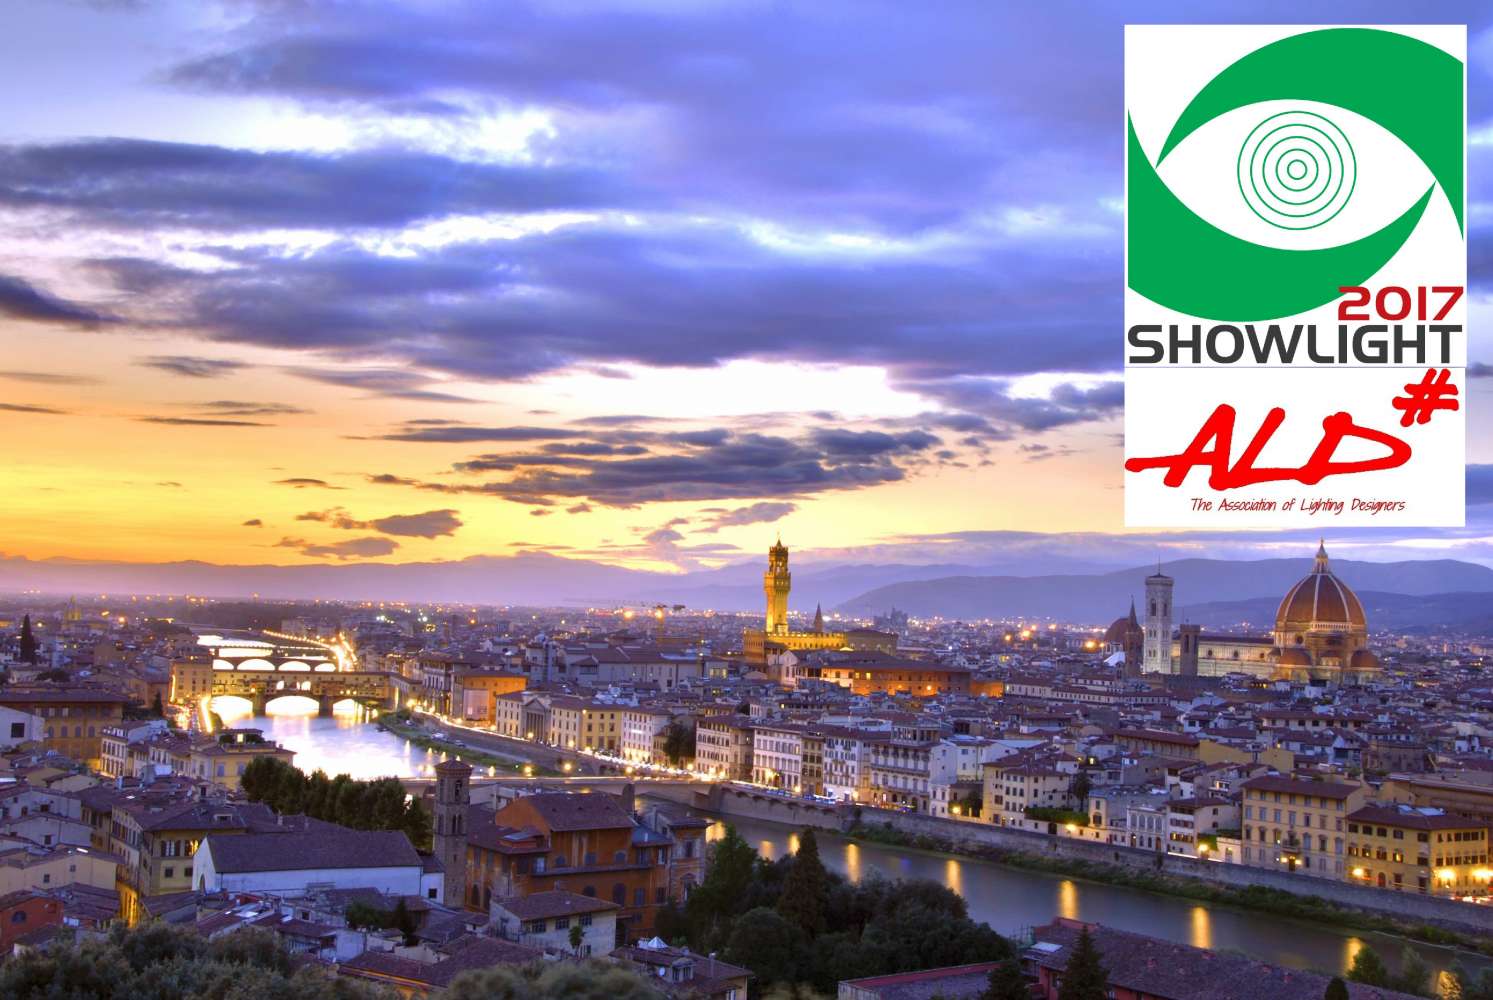 The ALD is strongly aligned with the event which takes place in Florence